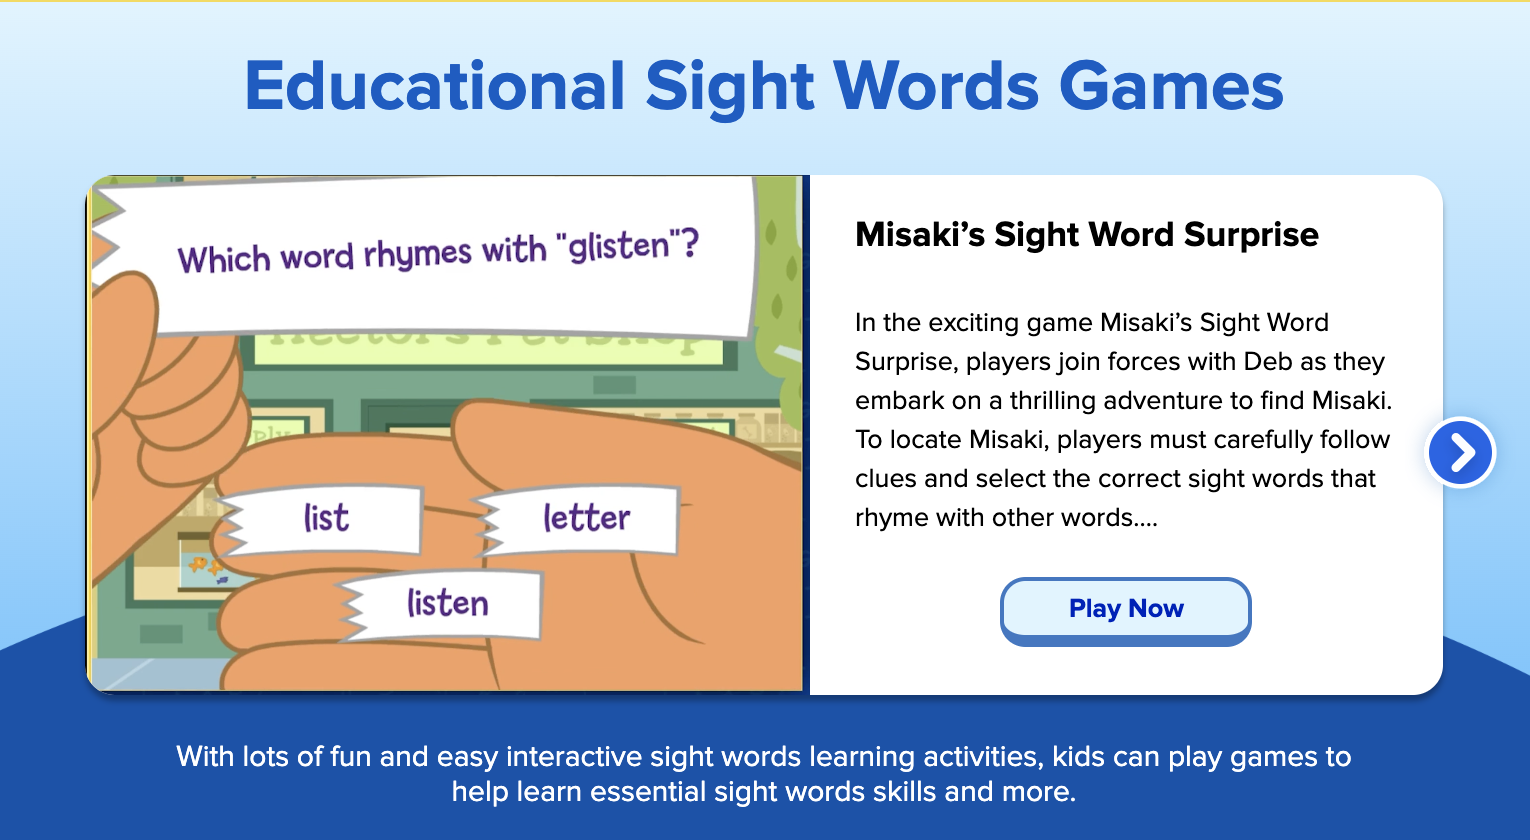 Free educations sight word games from ABCmouse.com